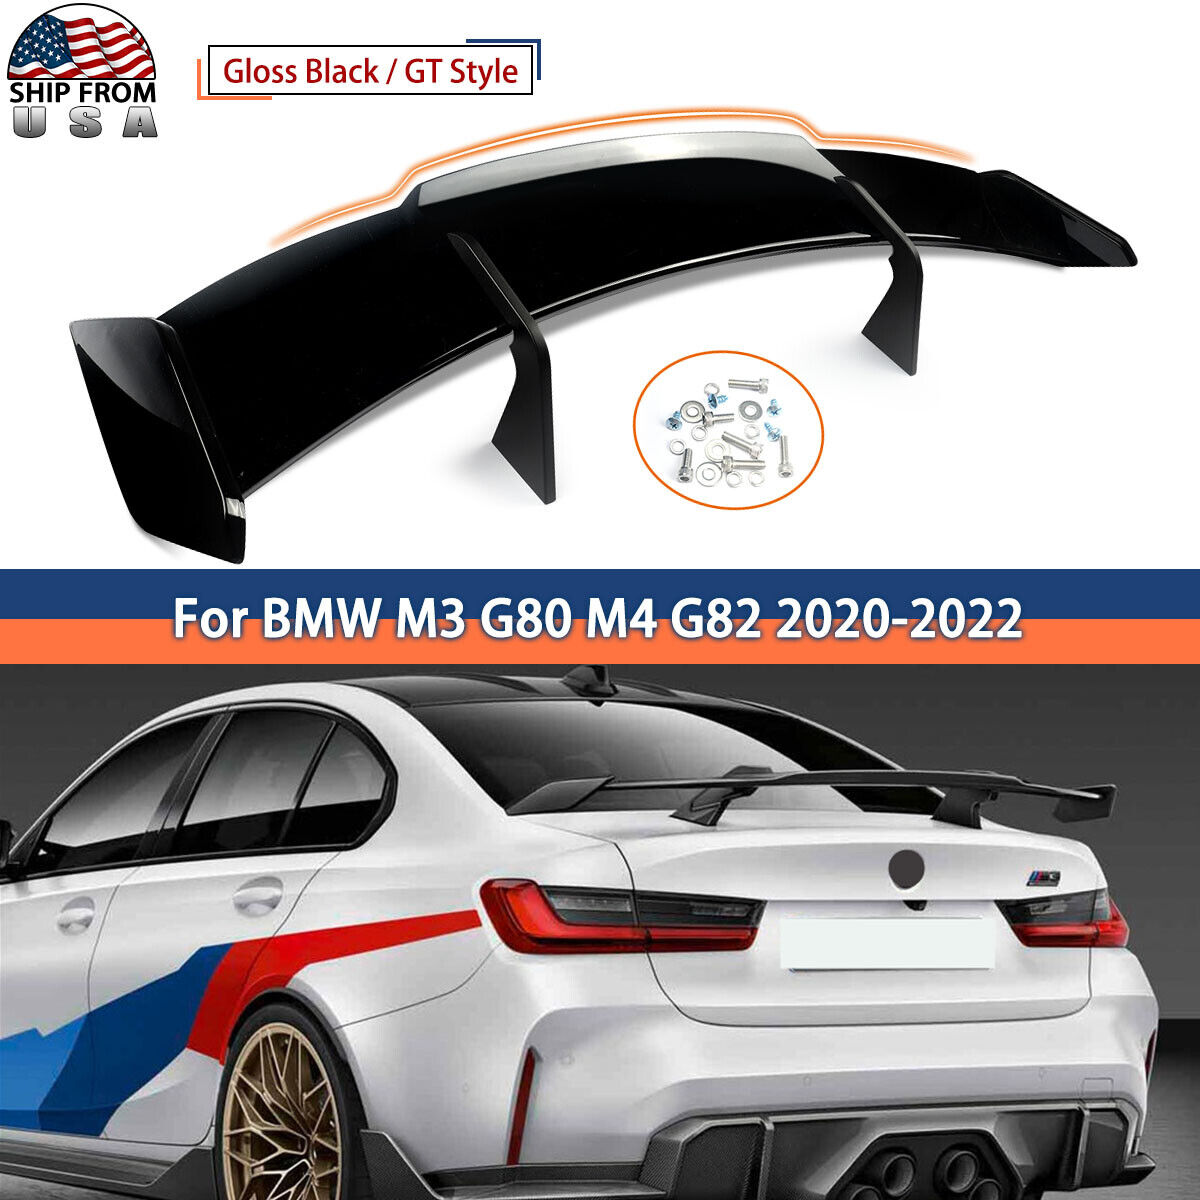 High Kick GT Style Rear Trunk Spoiler Wing For BMW M3 G80 M4 G82 2020-22 Glossy